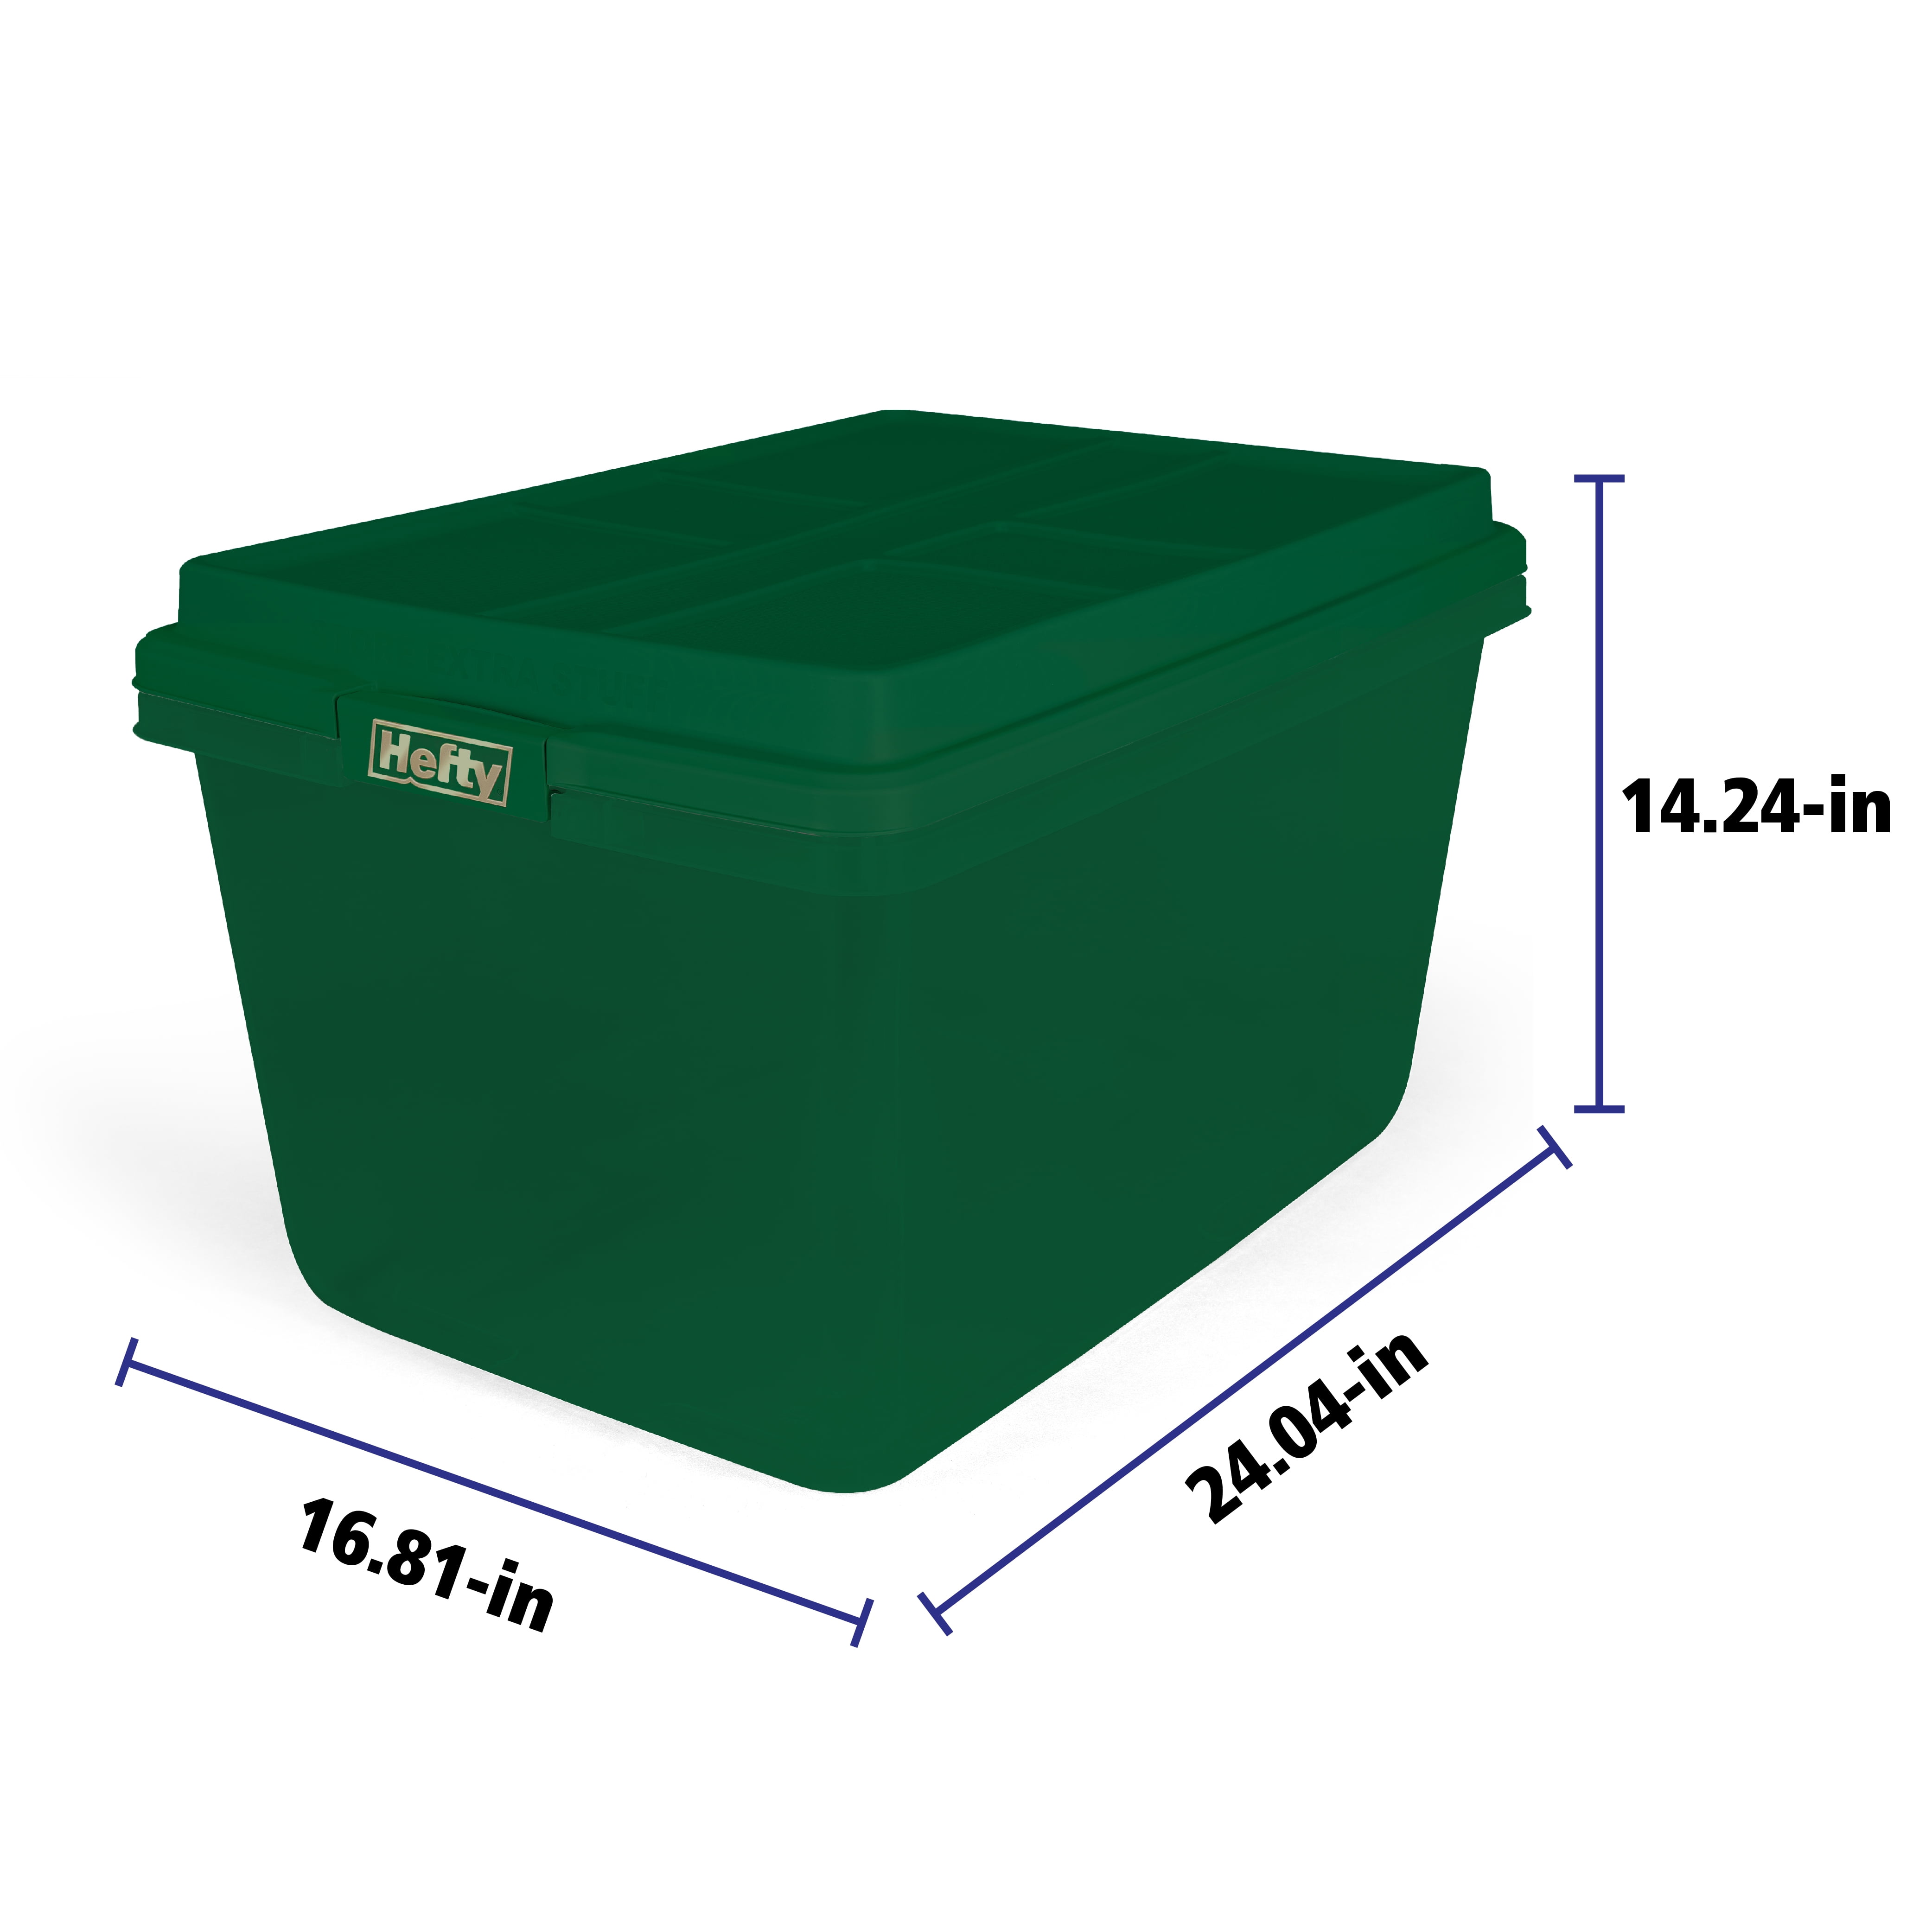 HOMZ 18 Gallon Heavy Duty Plastic Holiday Storage Totes, Green/Red (4 Pack)  - Bed Bath & Beyond - 37014325